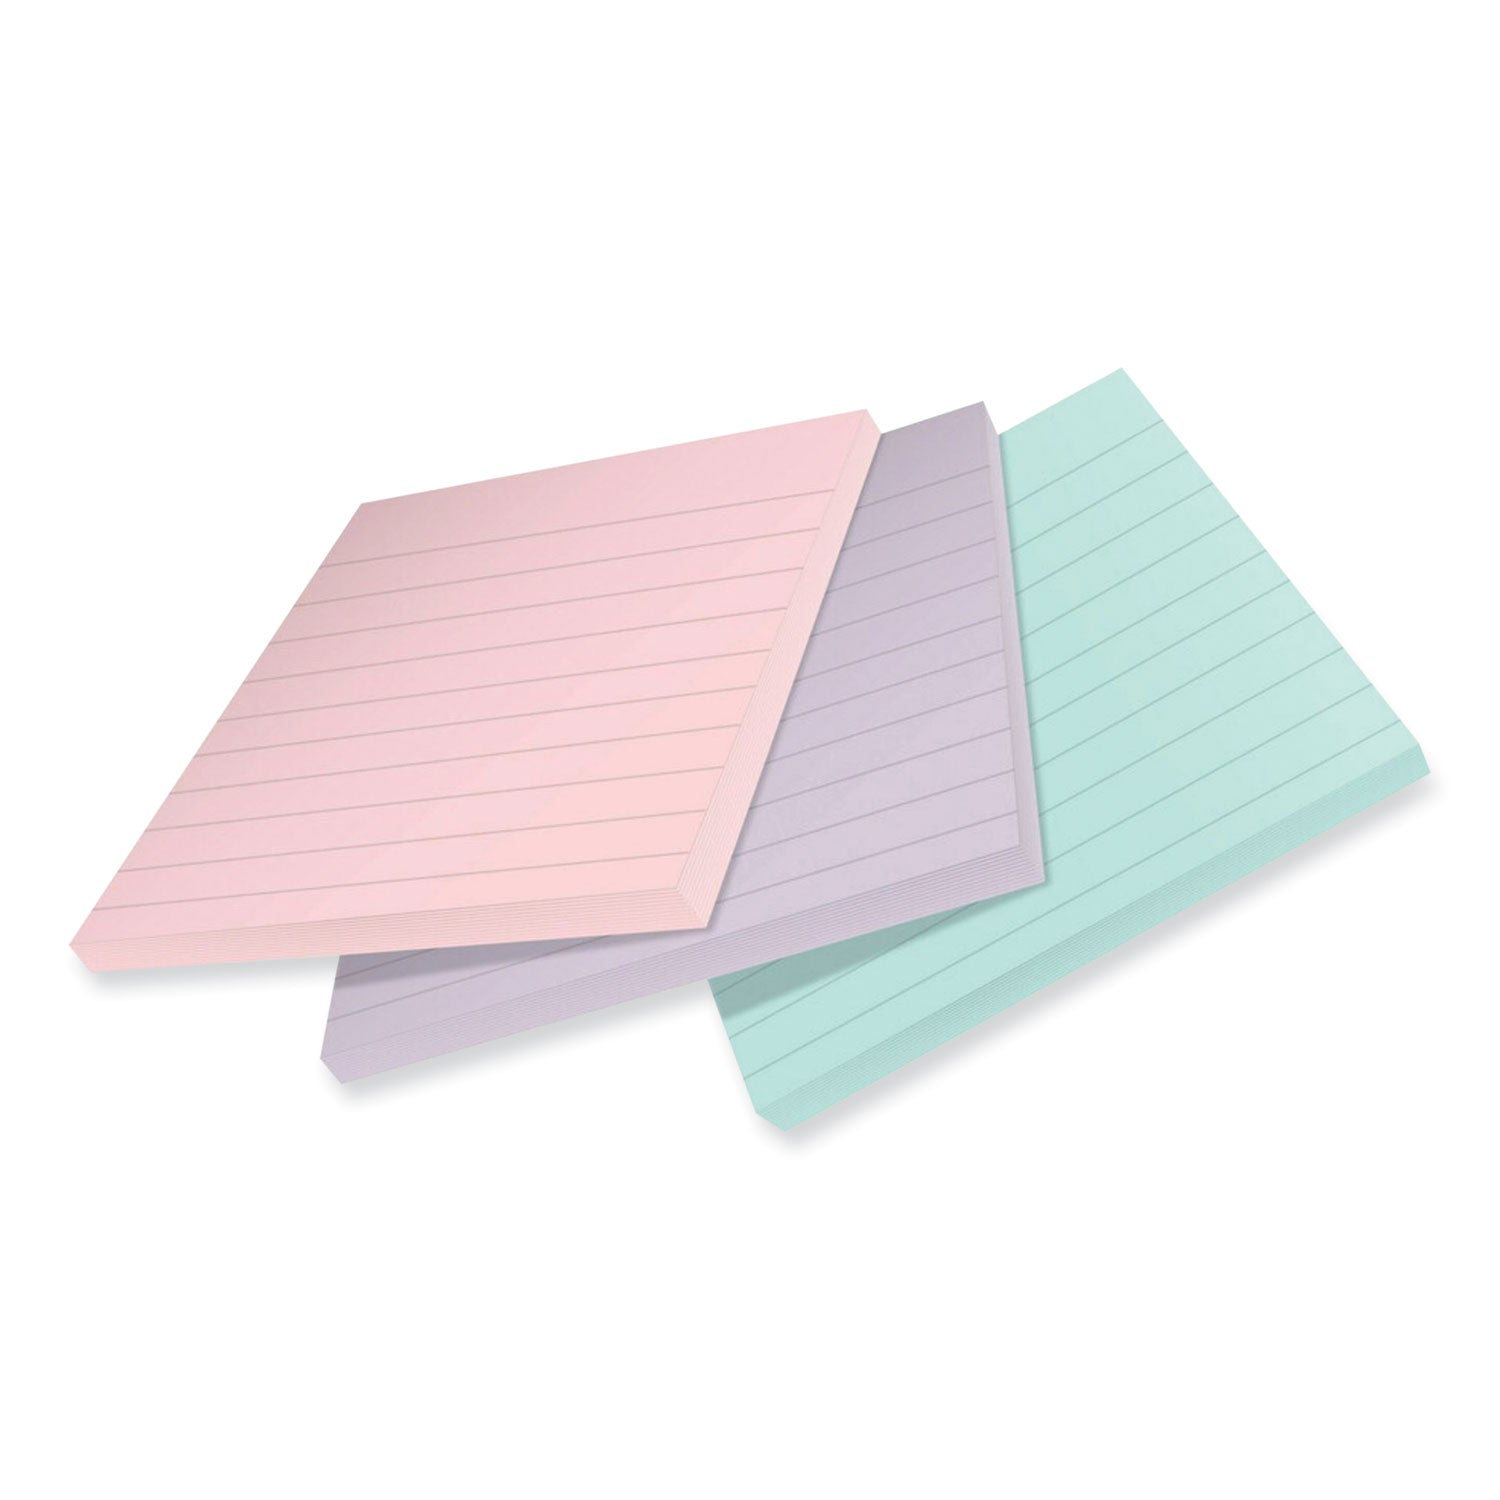 100%-recycled-paper-super-sticky-notes-ruled-4-x-4-wanderlust-pastels-70-sheets-pad-3-pads-pack_mmm675r3ssnrp - 2